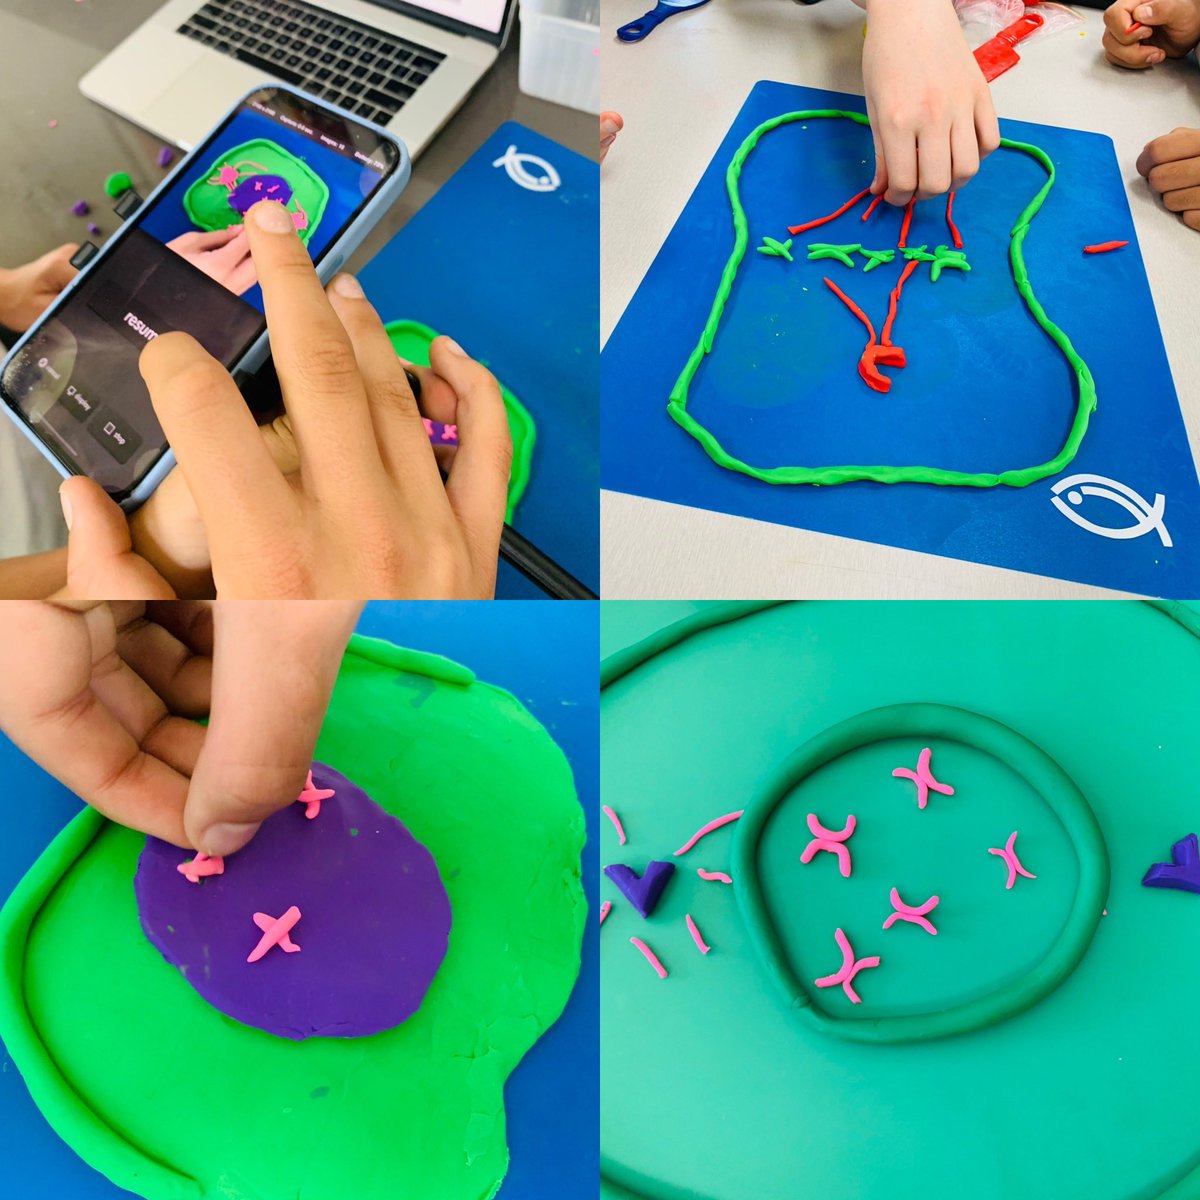 Modelling mitosis in Year 8 Science #Biology #Cells #Mitosis #Science #CellBiology #ScienceIsFun